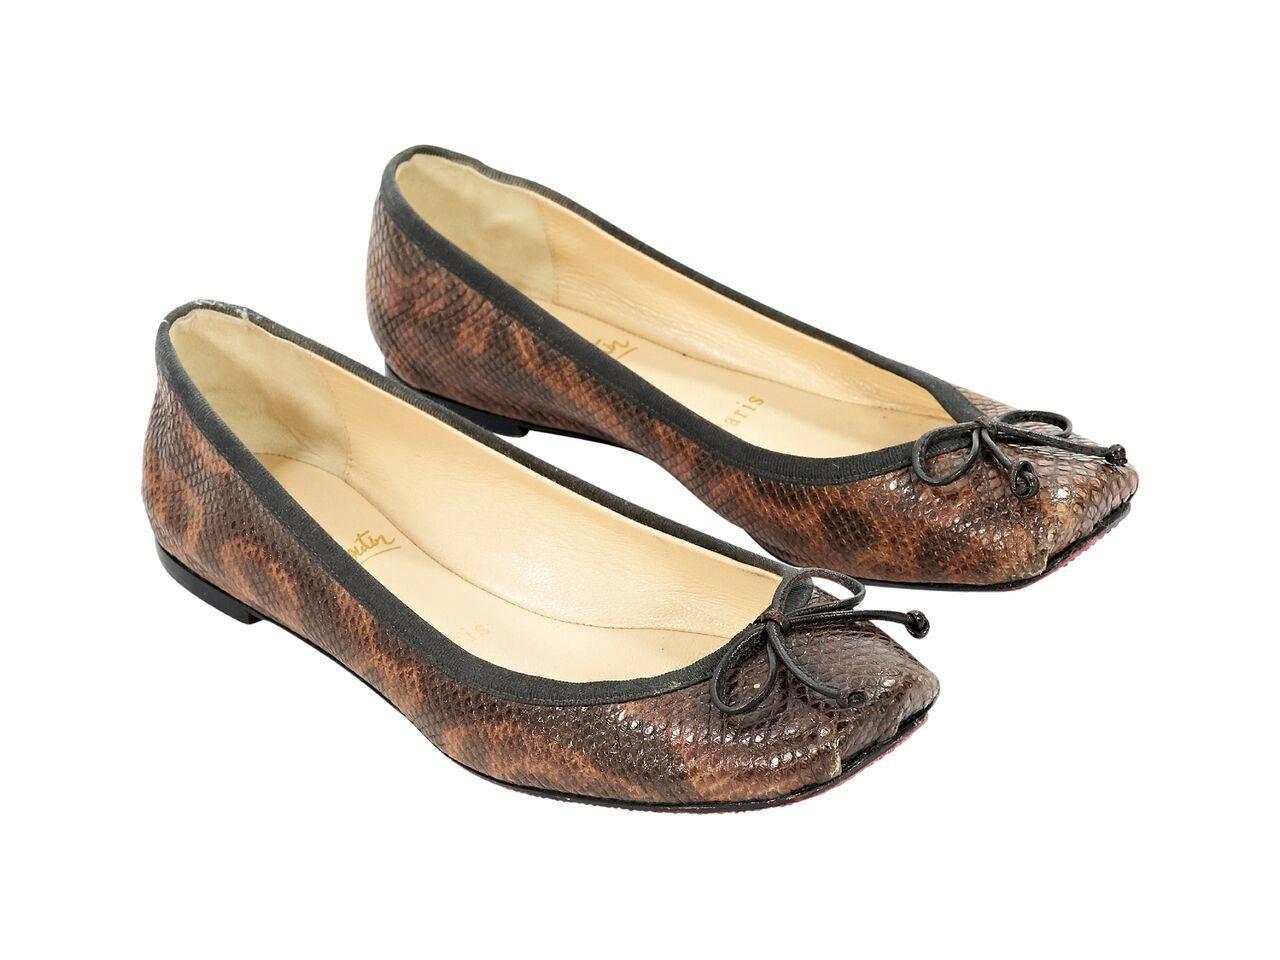 Product details:  Brown snakeskin ballet flats by Christian Louboutin.  Bow accents vamp.  Rounded square toe.  Iconic red sole.  Slip-on style. 
Condition: Pre-owned. Very good.
Est. Retail $ 998.00